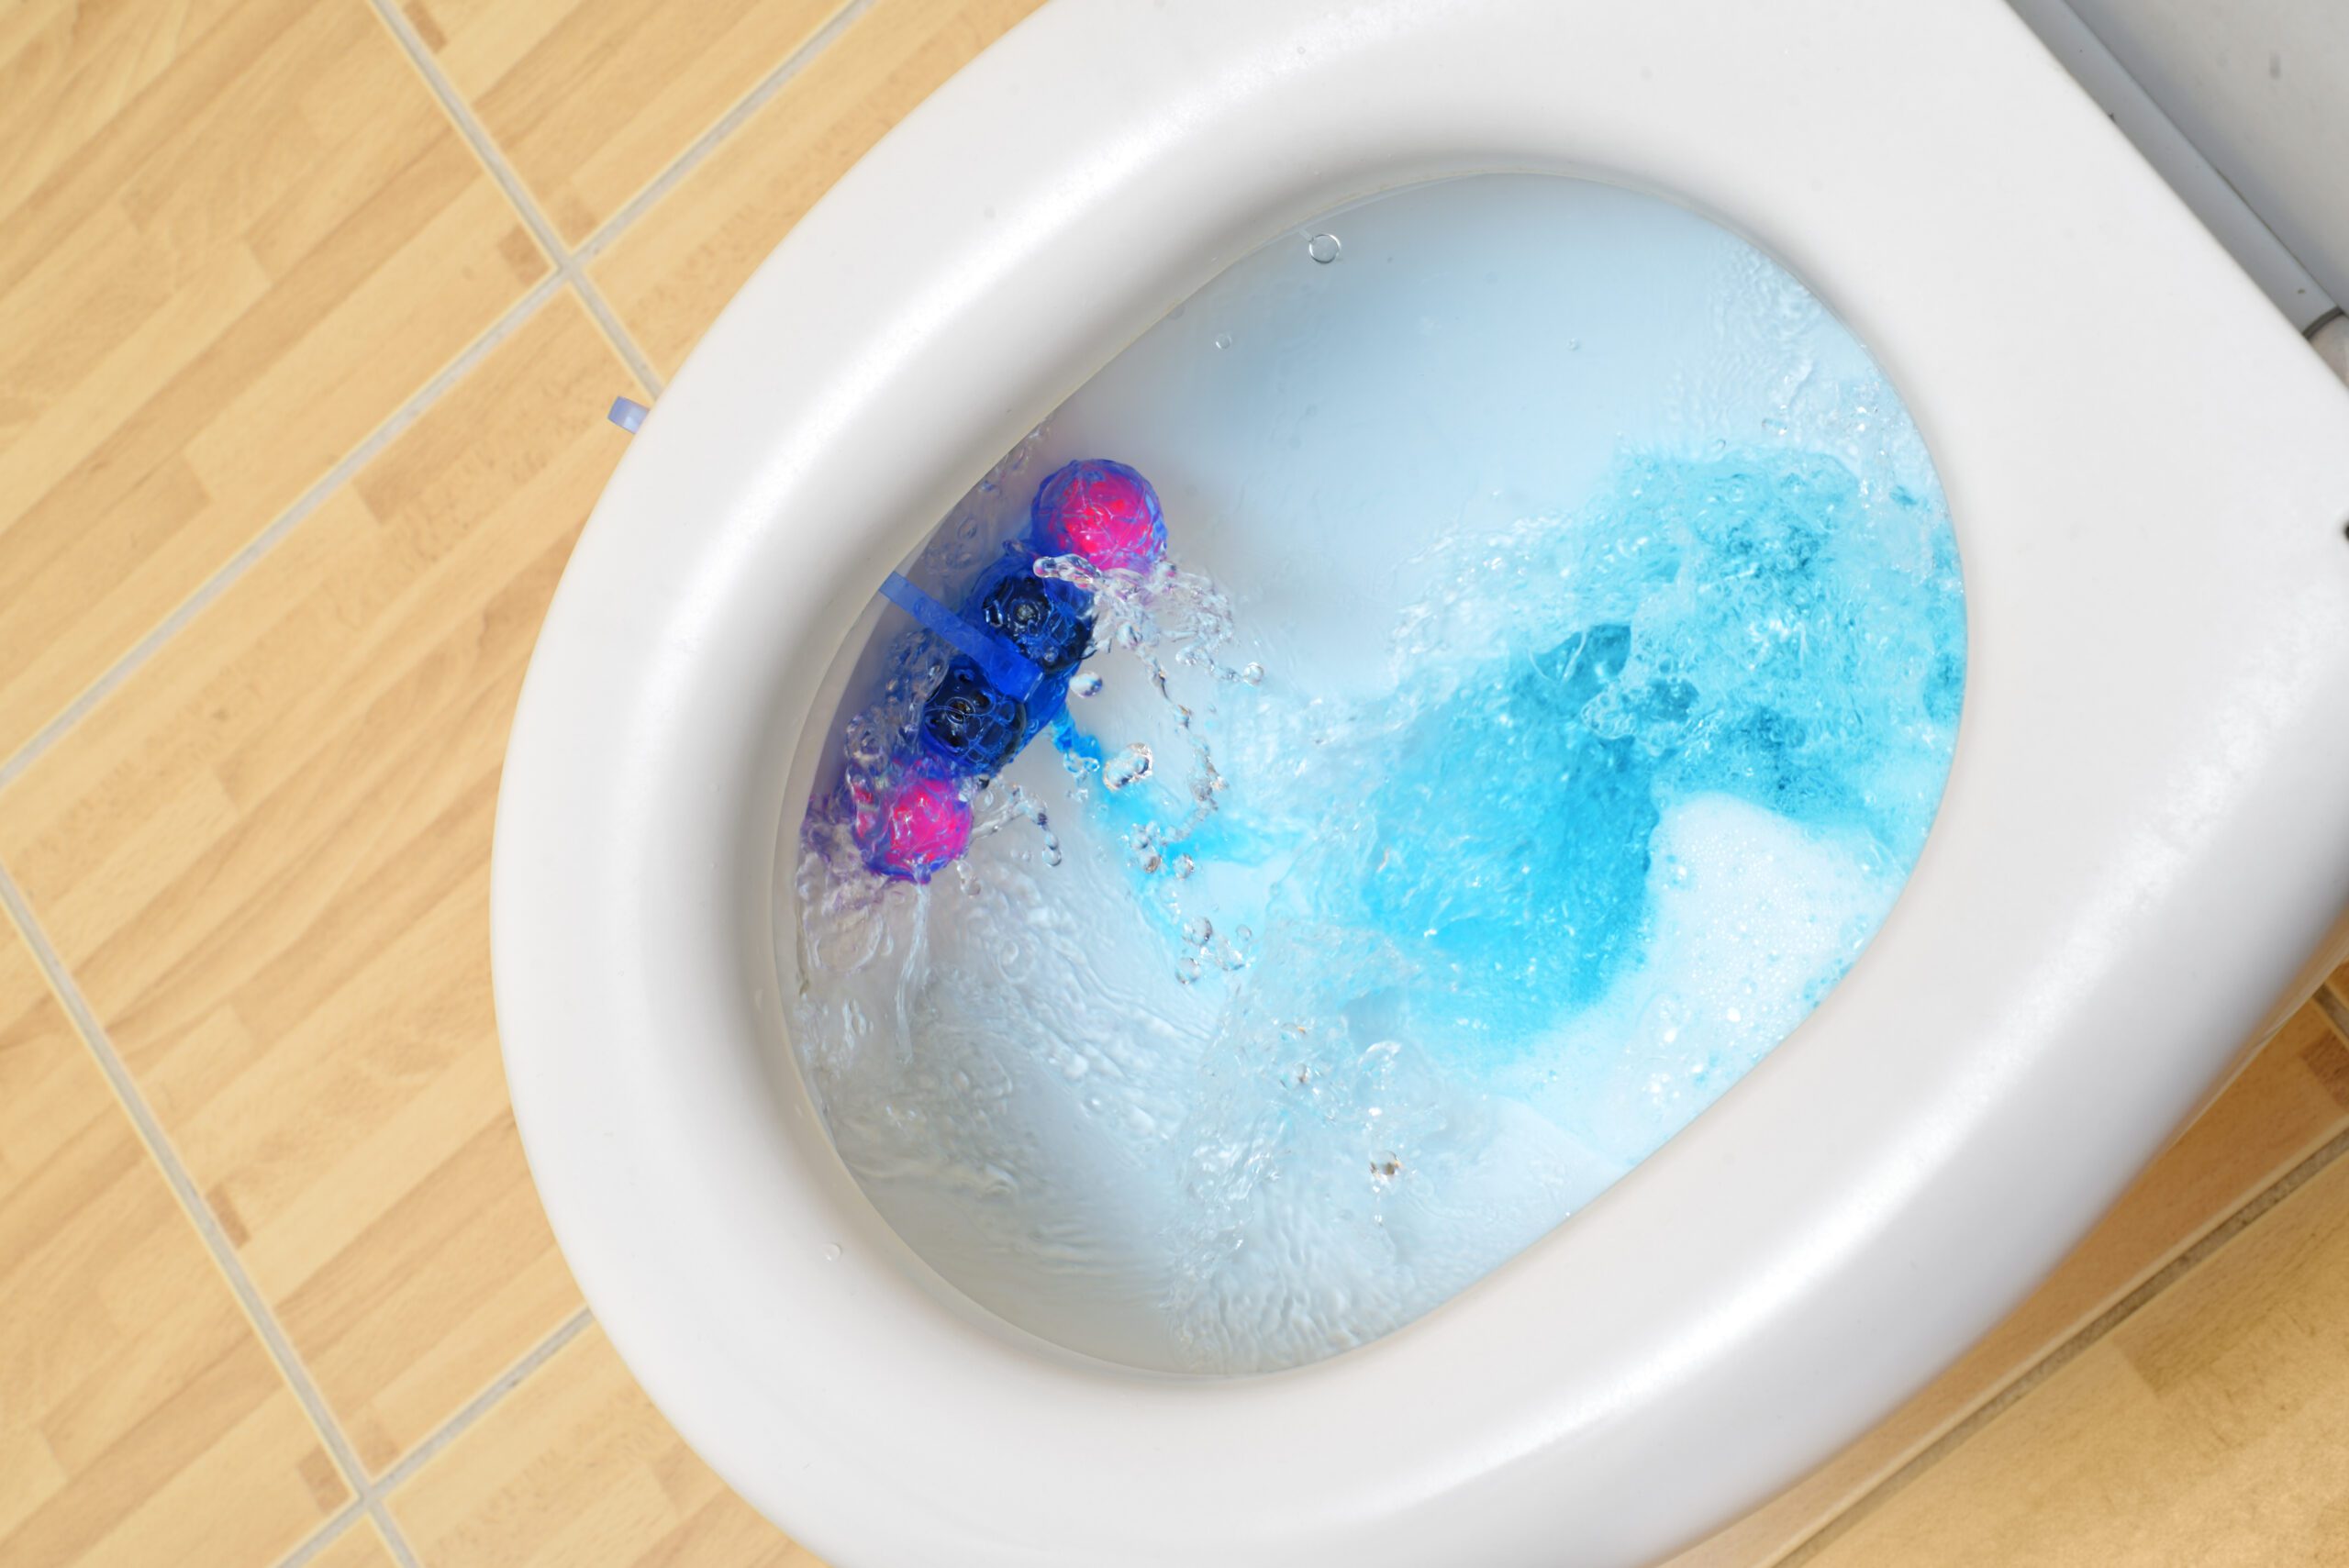 Are Drop-In Toilet Bowl Cleaners Safe?